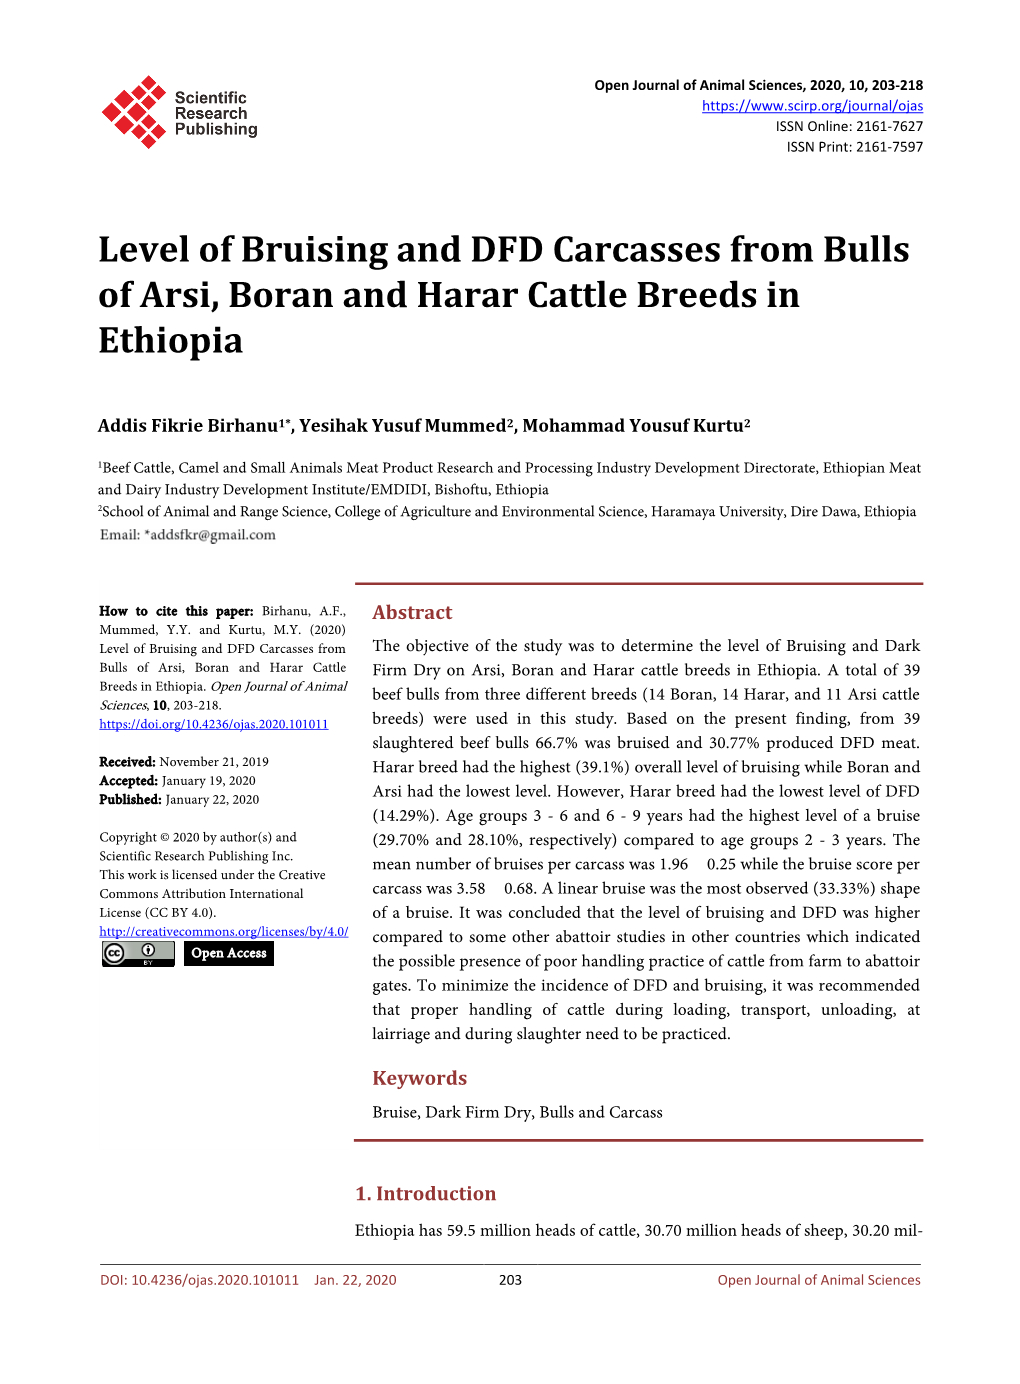 Level of Bruising and DFD Carcasses from Bulls of Arsi, Boran and Harar Cattle Breeds in Ethiopia